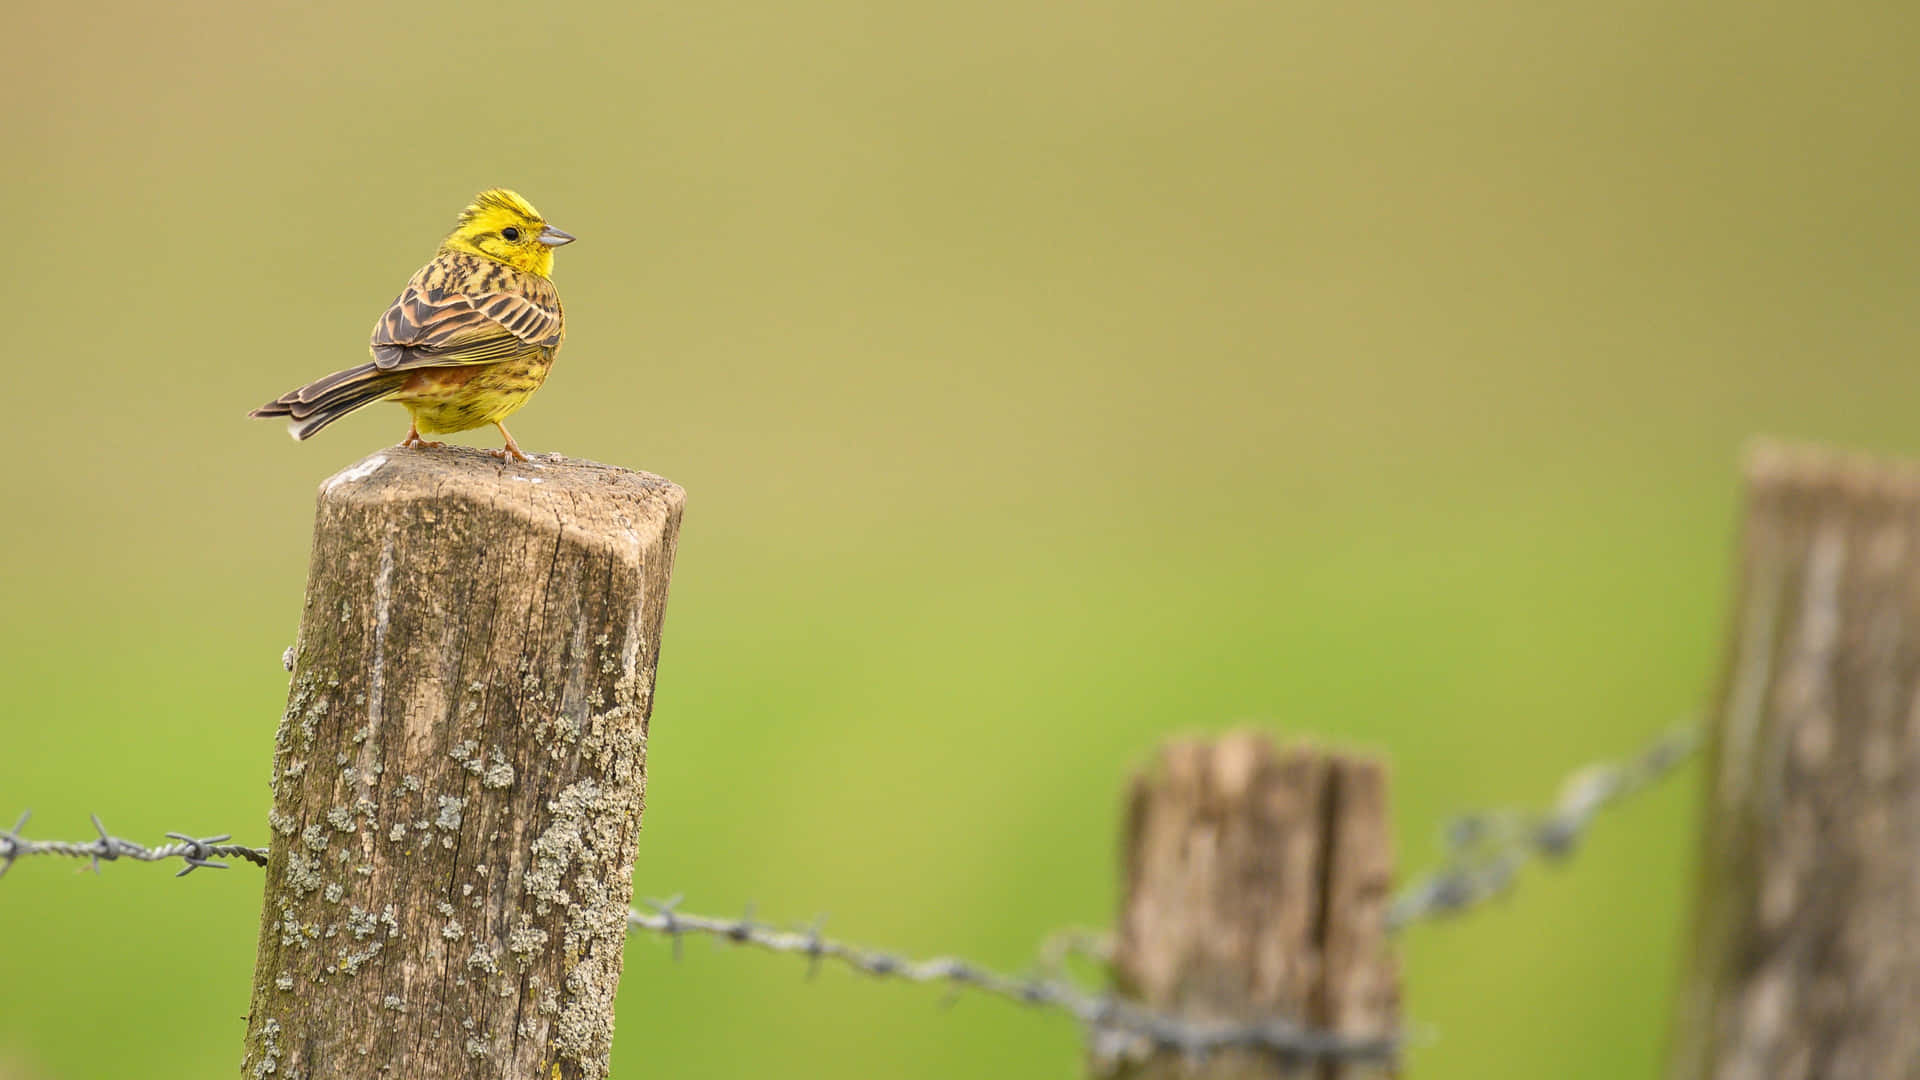 Stunning Yellowhammer perched on a branch Wallpaper